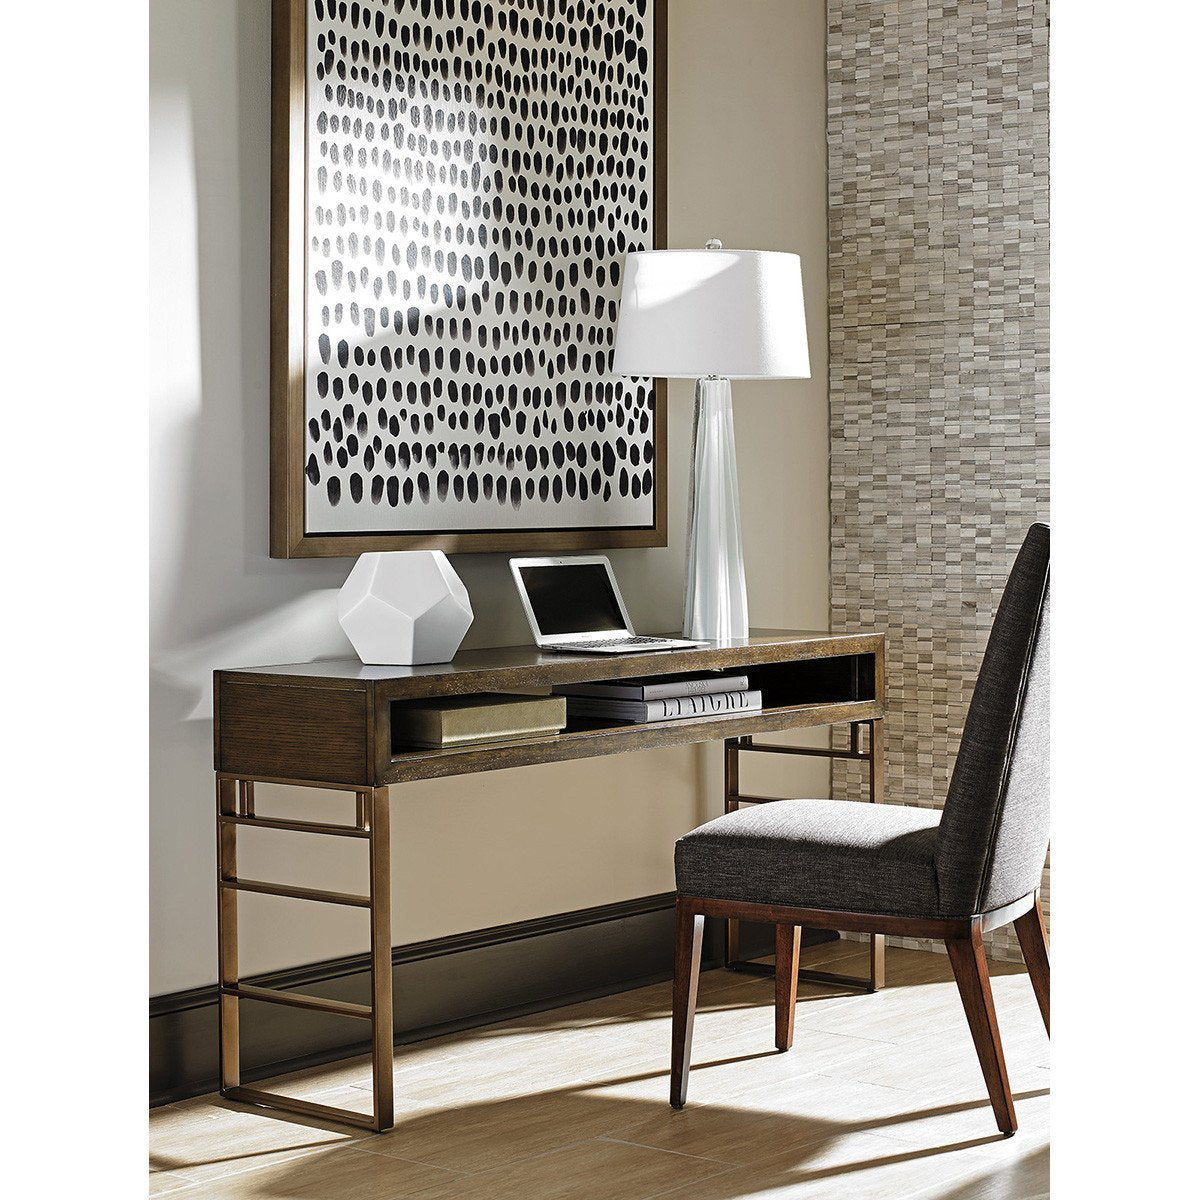 Sligh Cross Effect Kinetic Office Console Table